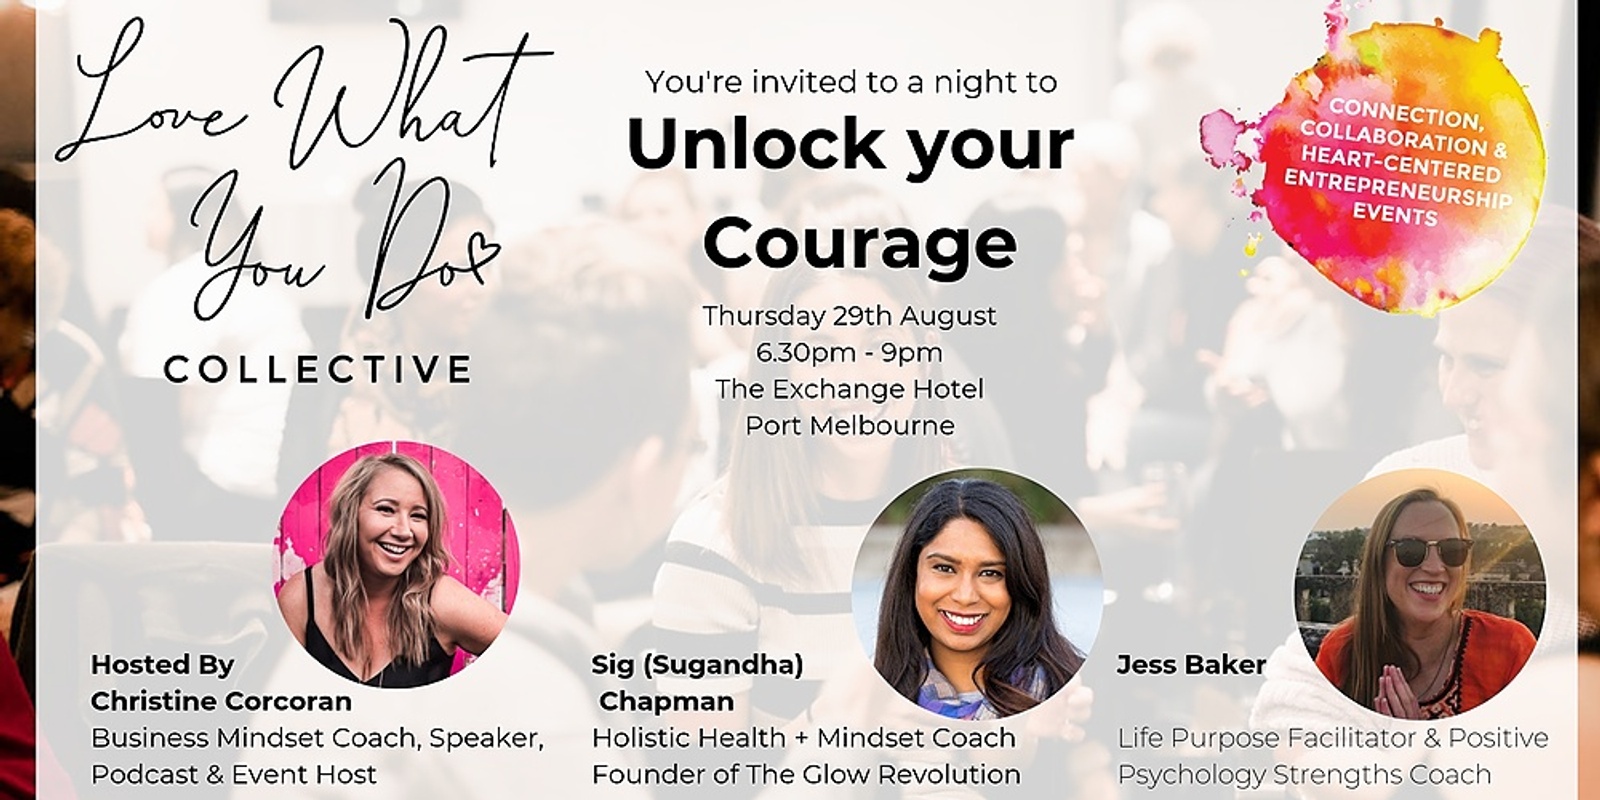 Banner image for Unlock your Courage- Love What You Do Melbourne Event